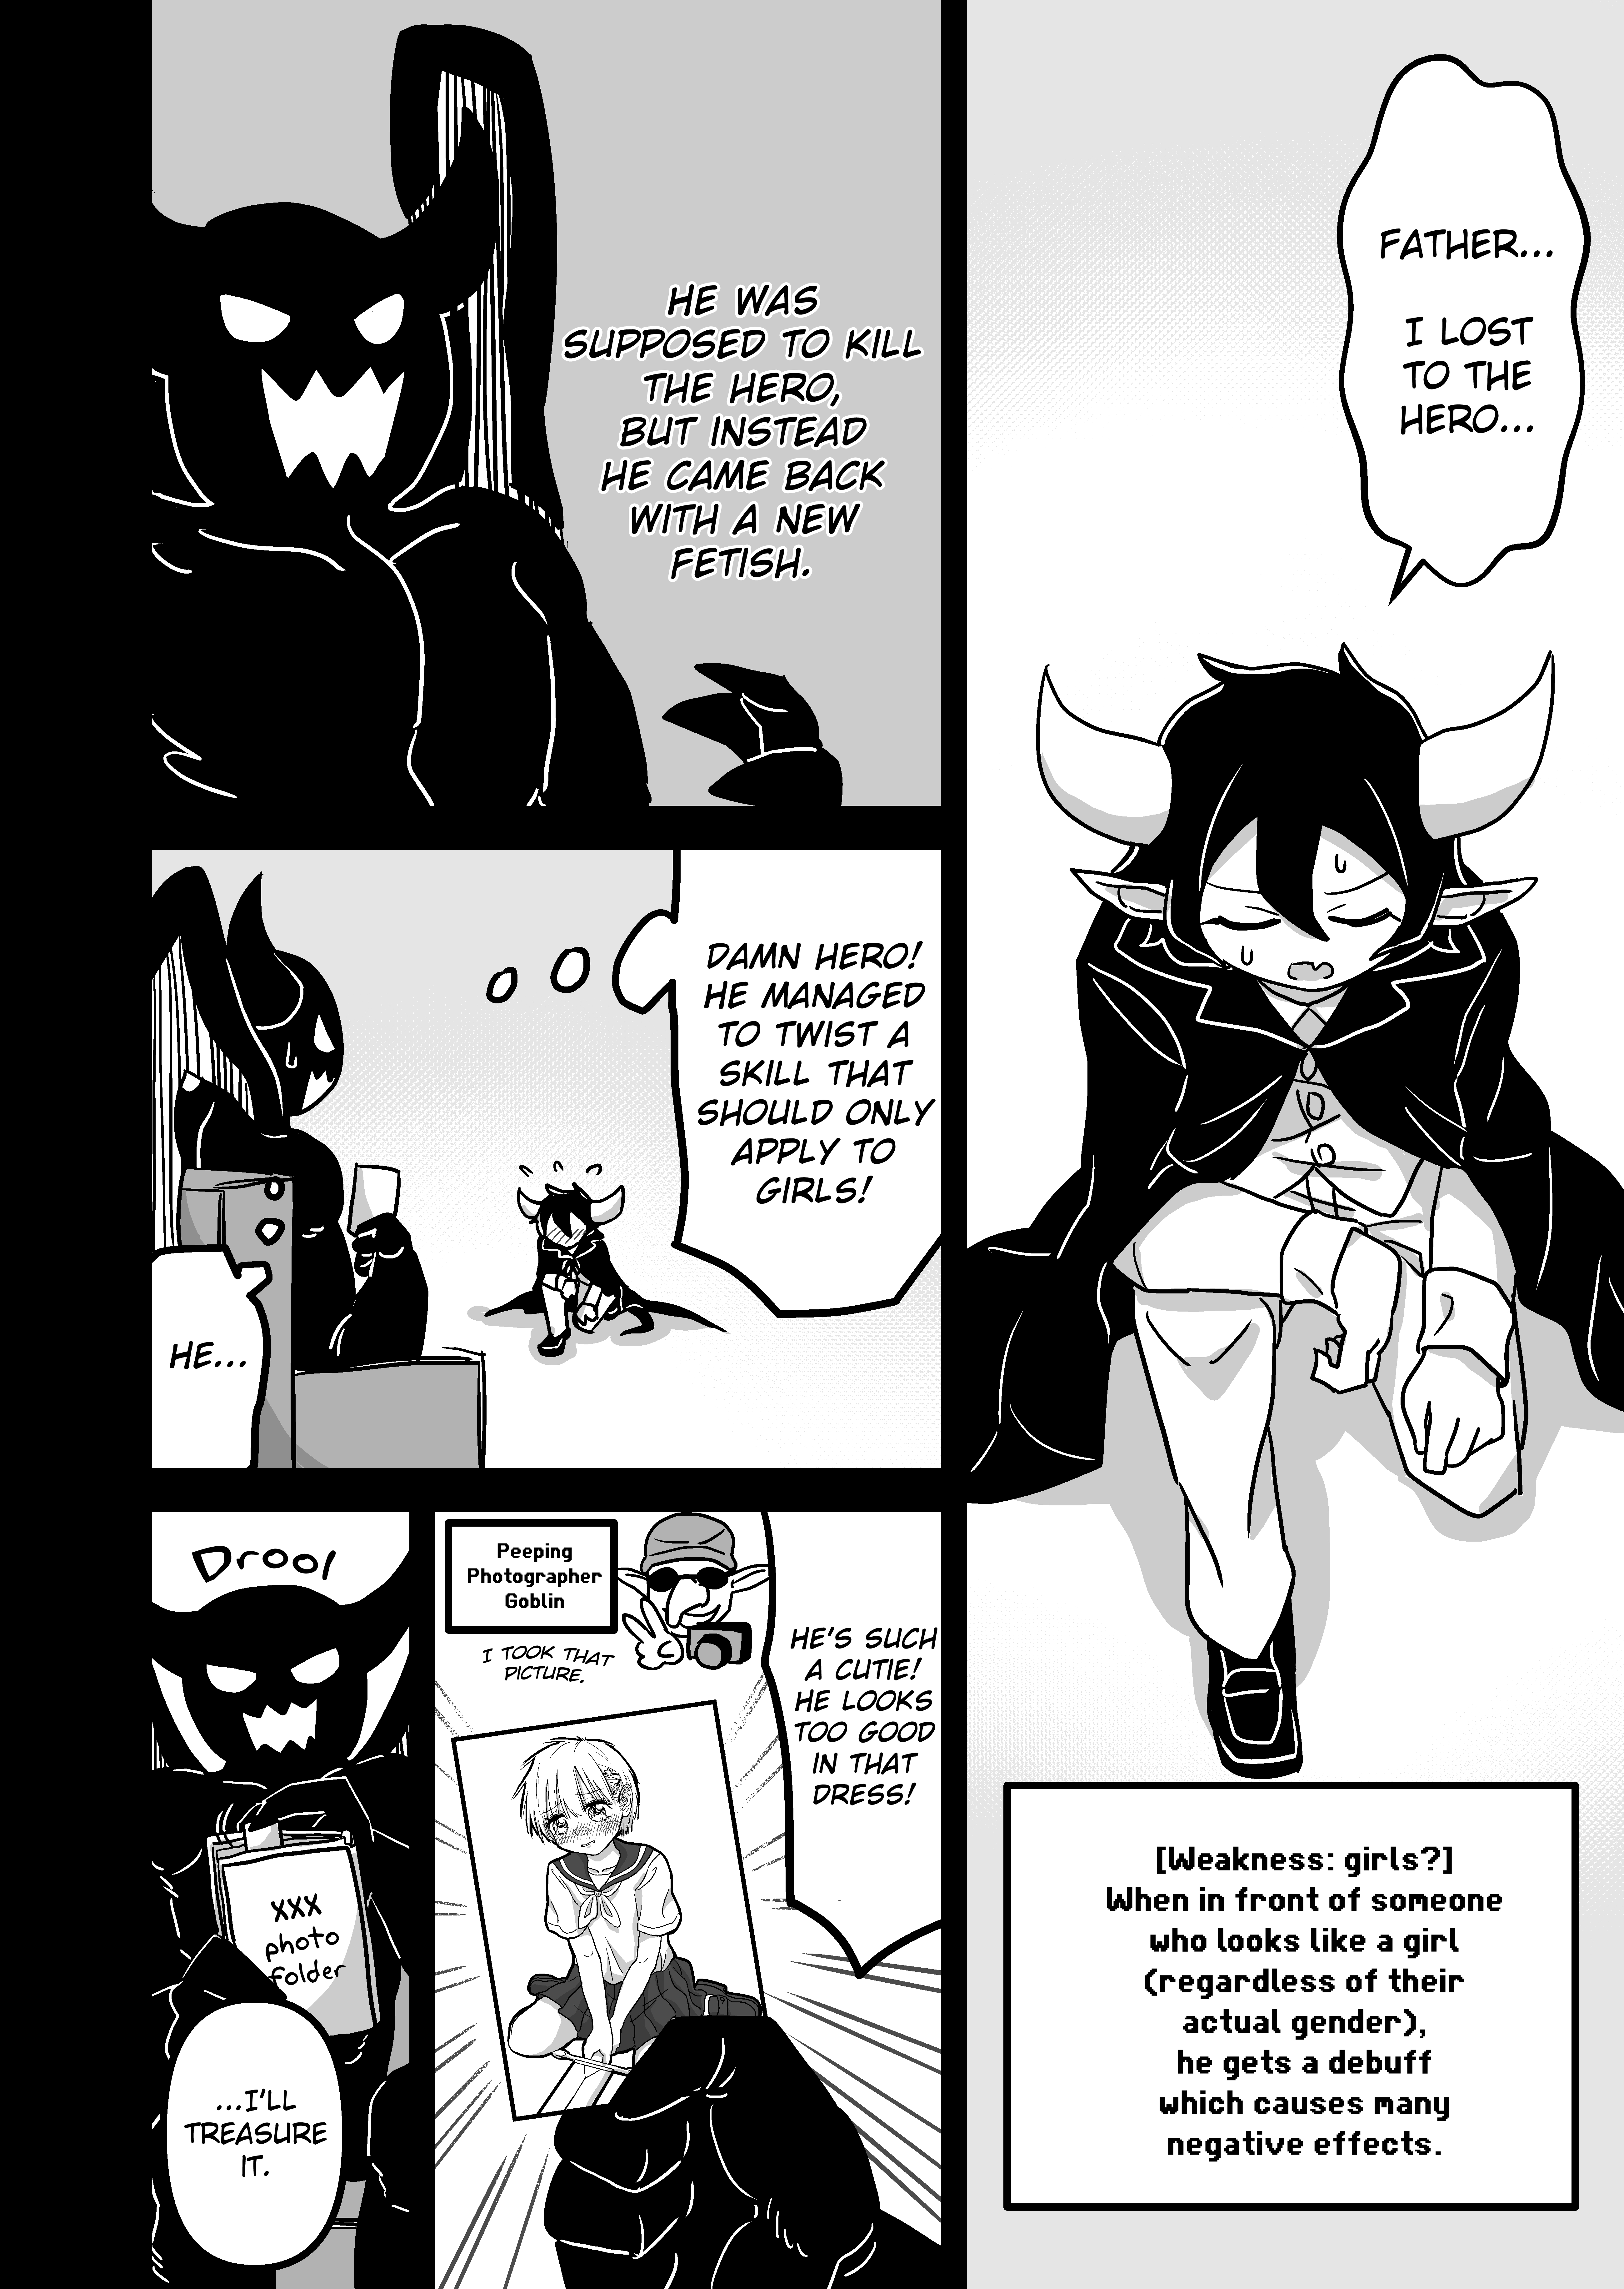 Crossdressing Quest - Page 1